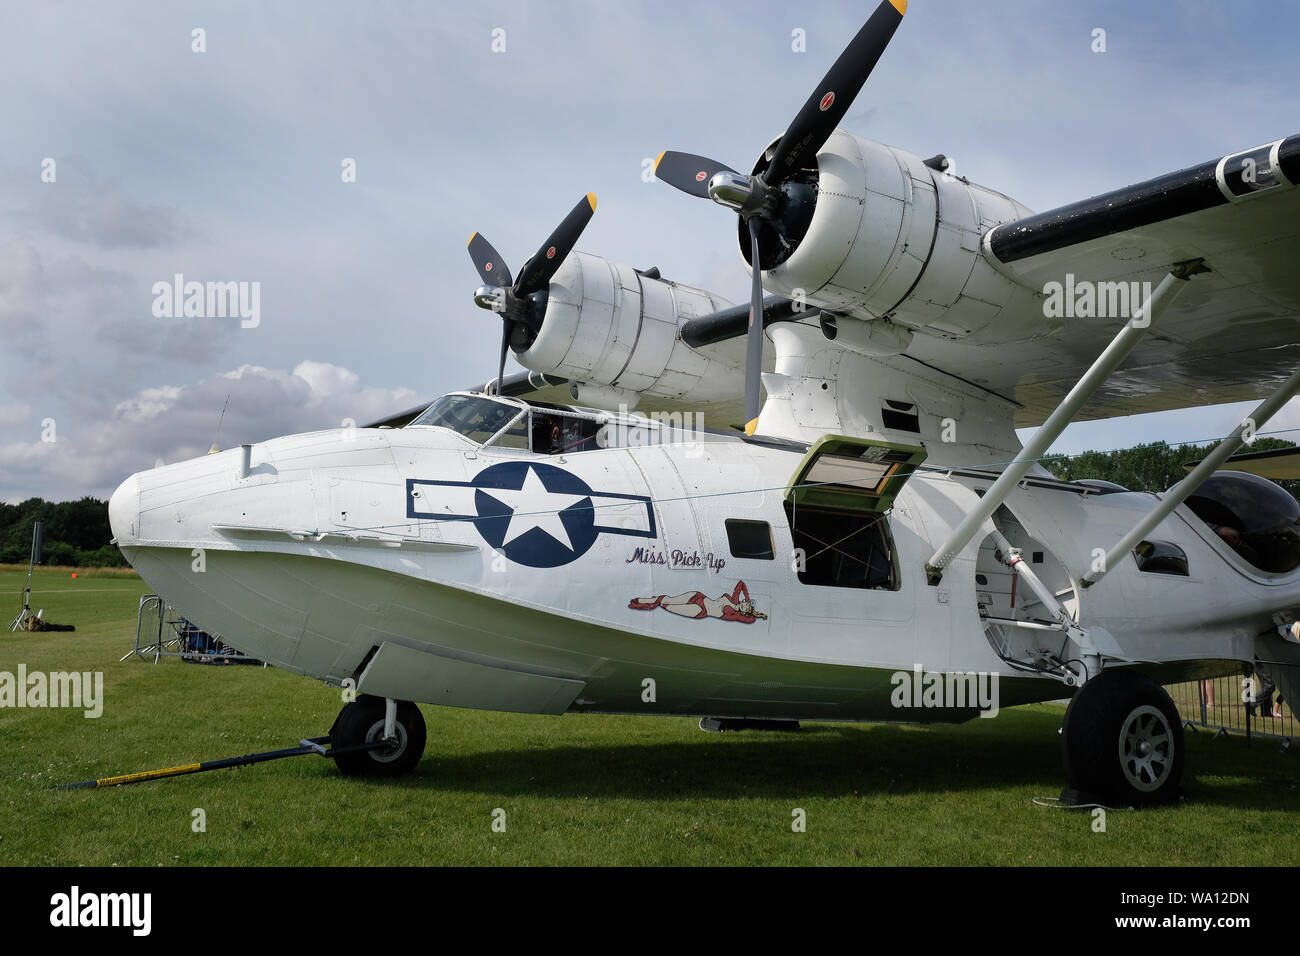 The Consolidated PBY Catalina, also known as the Canso in Canadian service, is an American flying boat, and later an amphibious aircraft of the 1930s Stock Photo